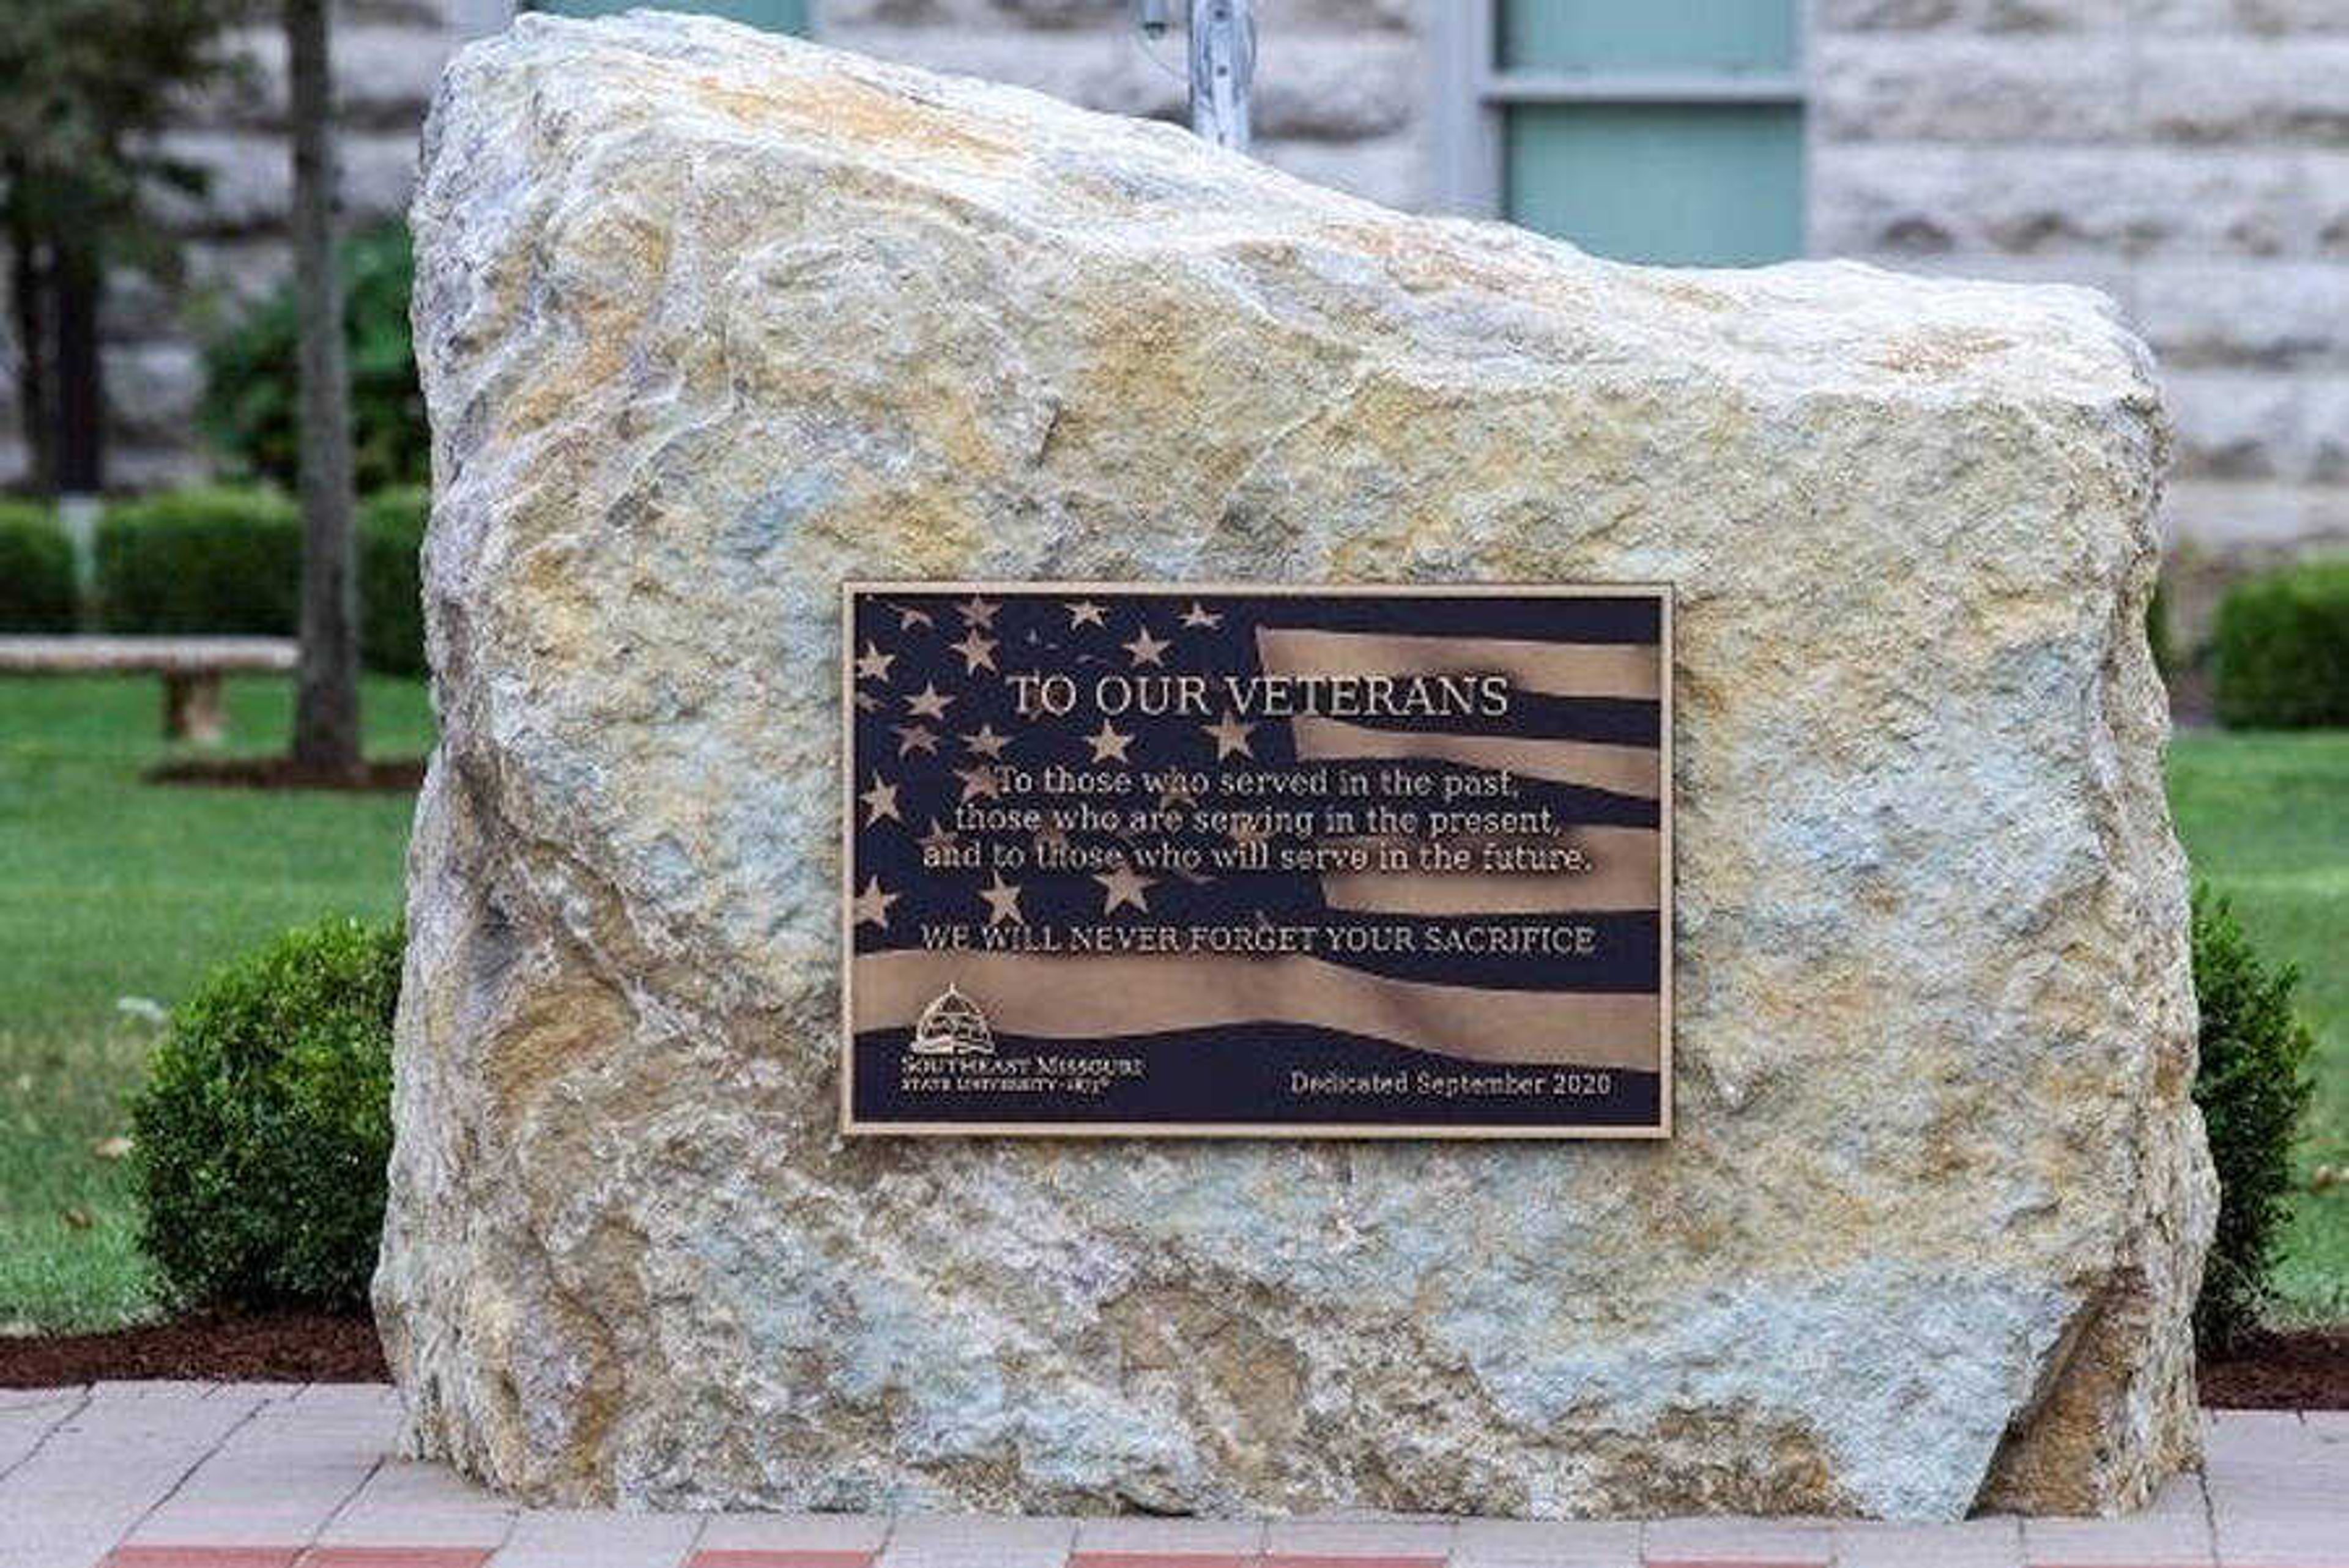 The monument and engraved bricks at the Veterans Plaza dedication ceremony on Sept. 25.